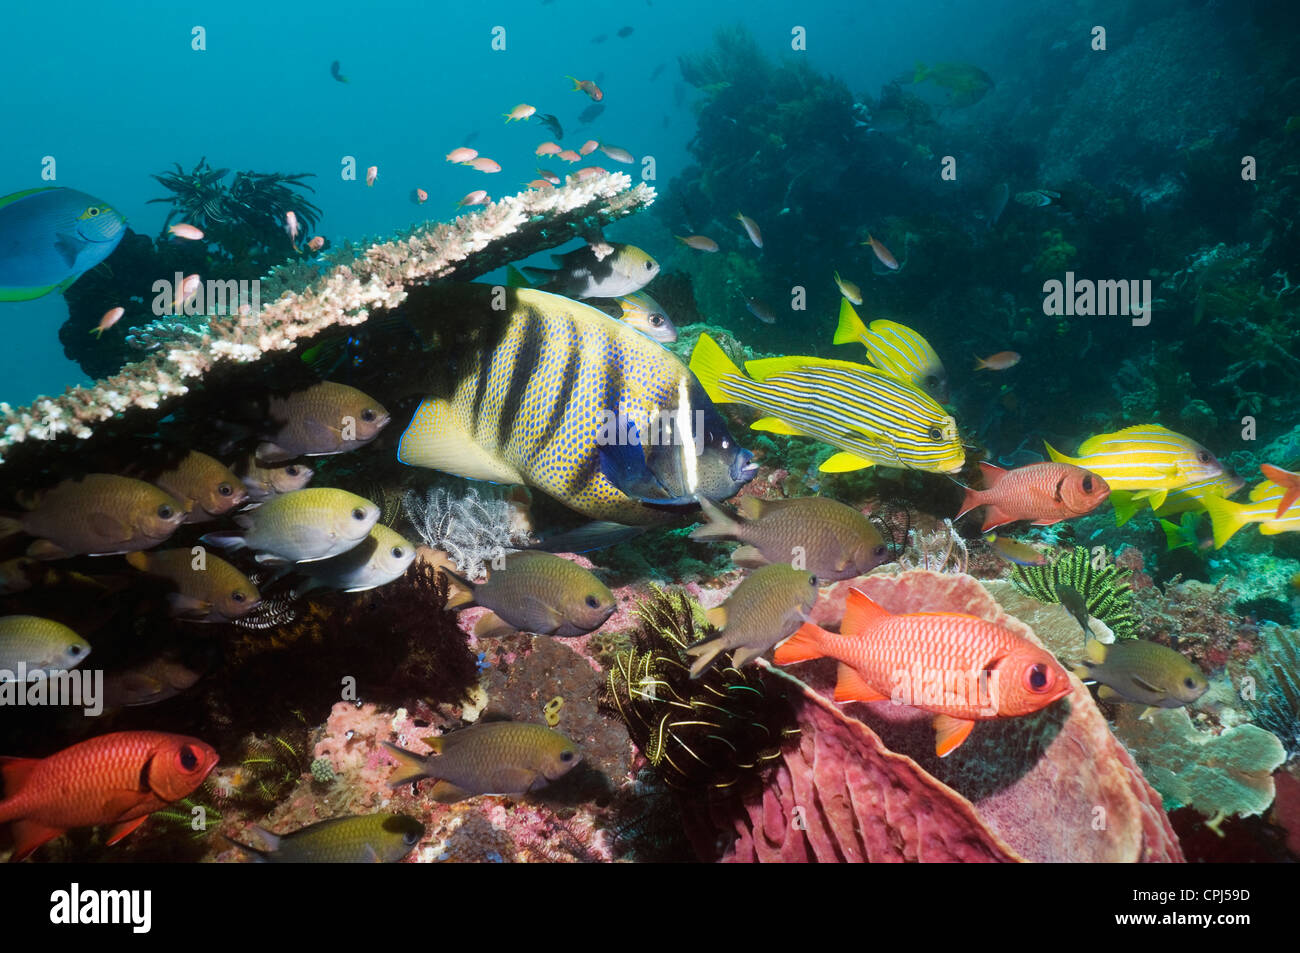 Six-banded angelfish and other fish sheltering on coral reef.  Rinca Komodo National Park Indonesia. Stock Photo